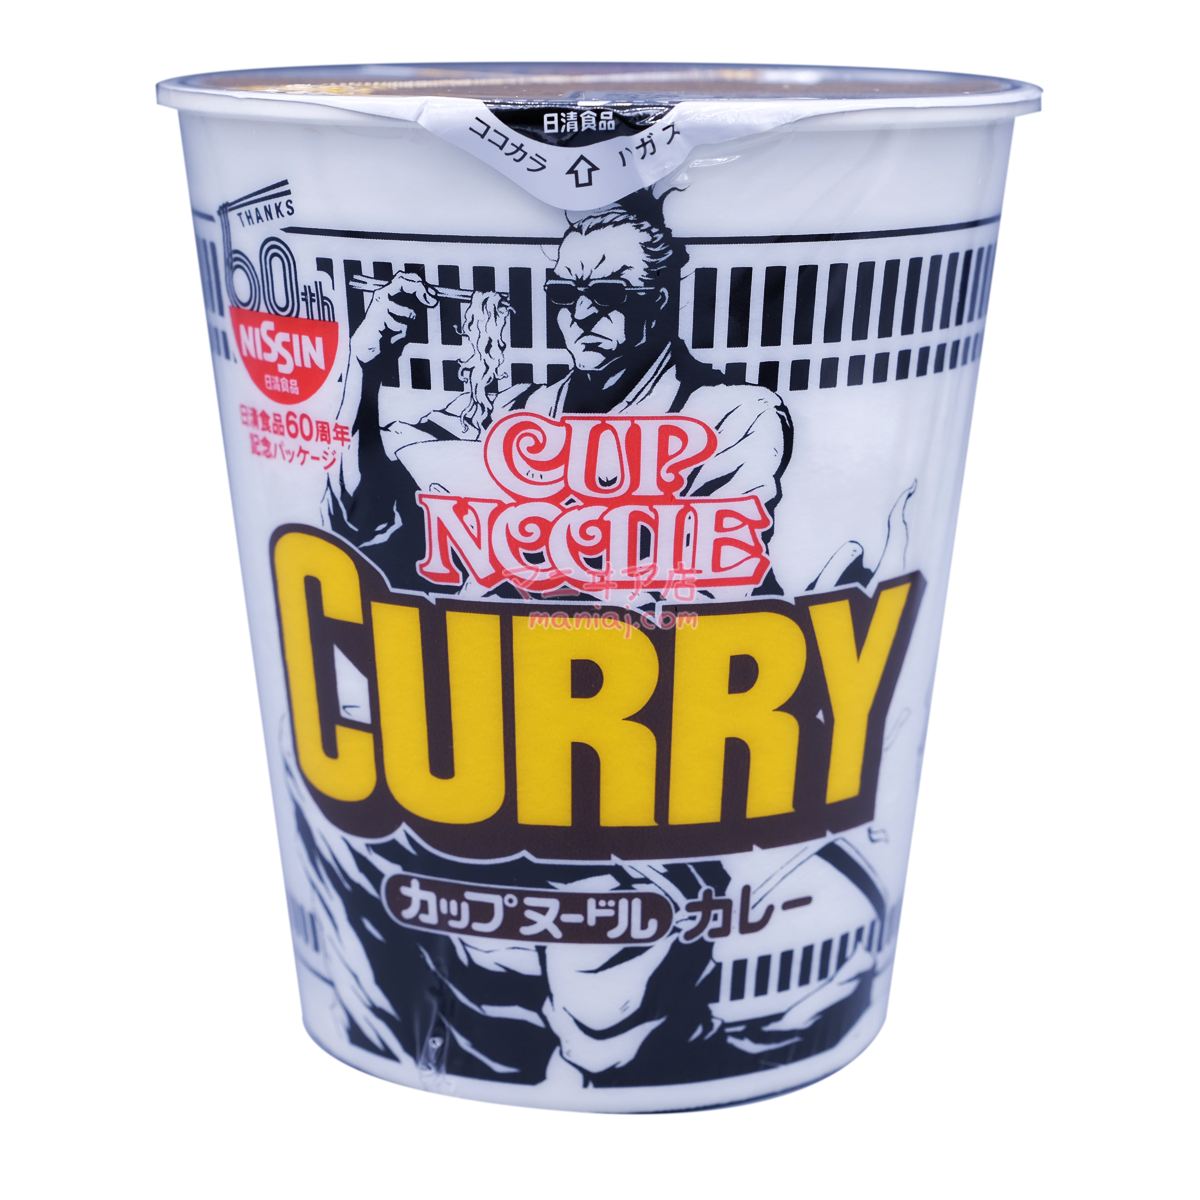 60th Anniversary Curry Cup Noodles